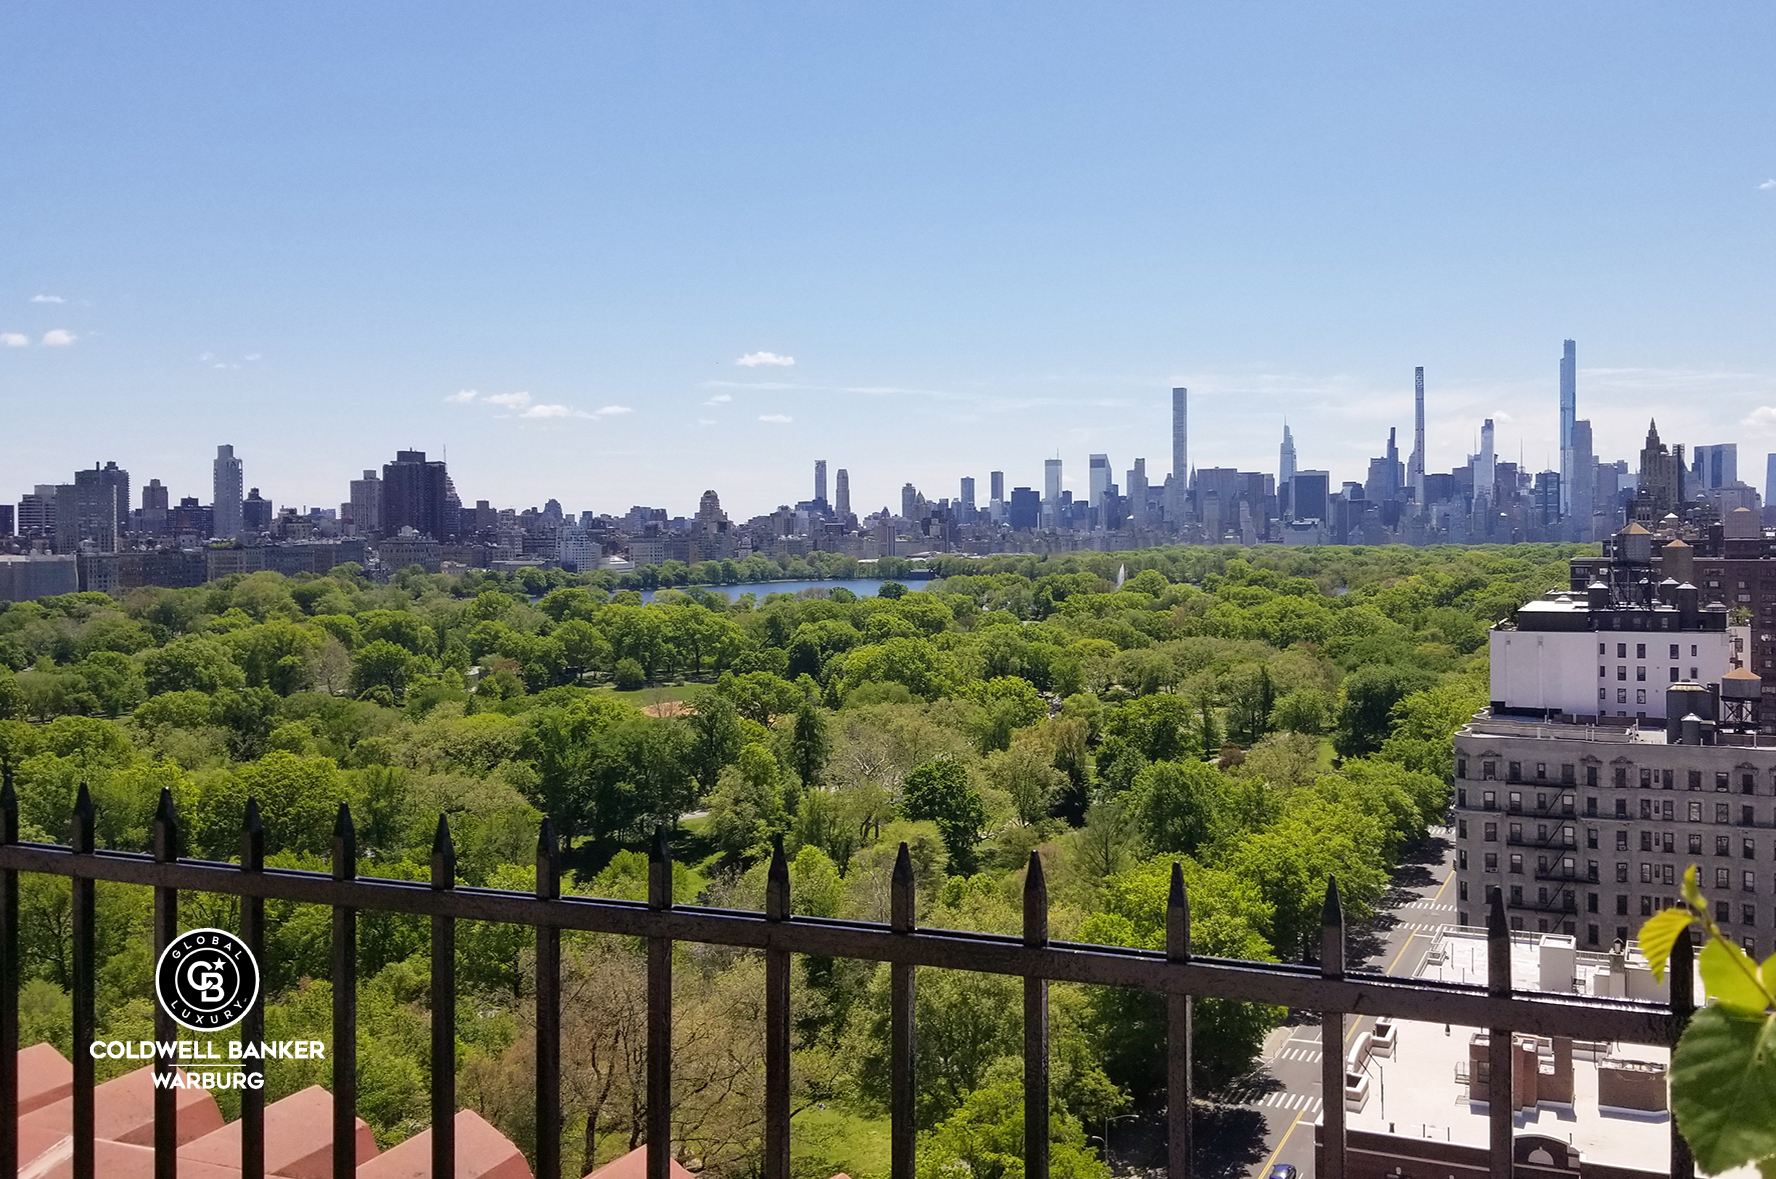 444 Central Park W Unit 7D, New York, New York, 10025, United States, 2 Bedrooms Bedrooms, ,2 BathroomsBathrooms,Residential,For Sale,444 Central Park W Unit 7D,1490815